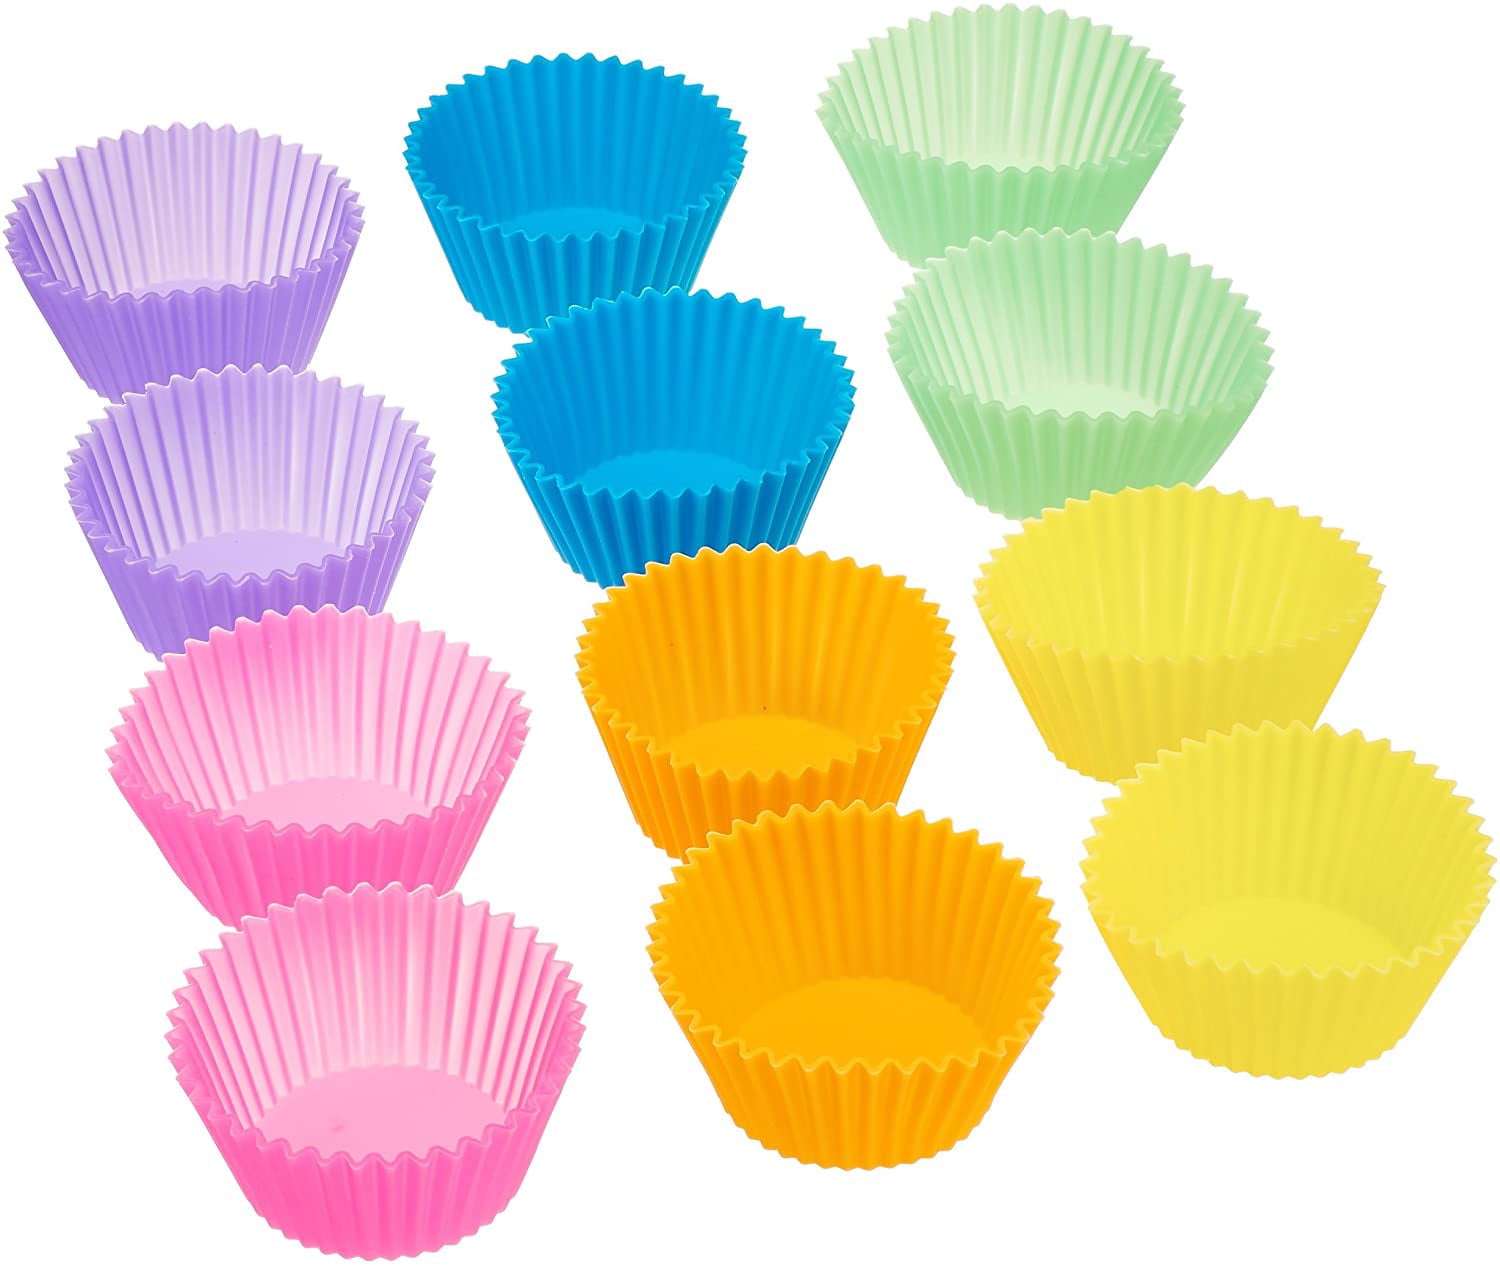 OXO Good Grips Silicone Baking Cups, Multicolor 3 oz.(Pack of 12)